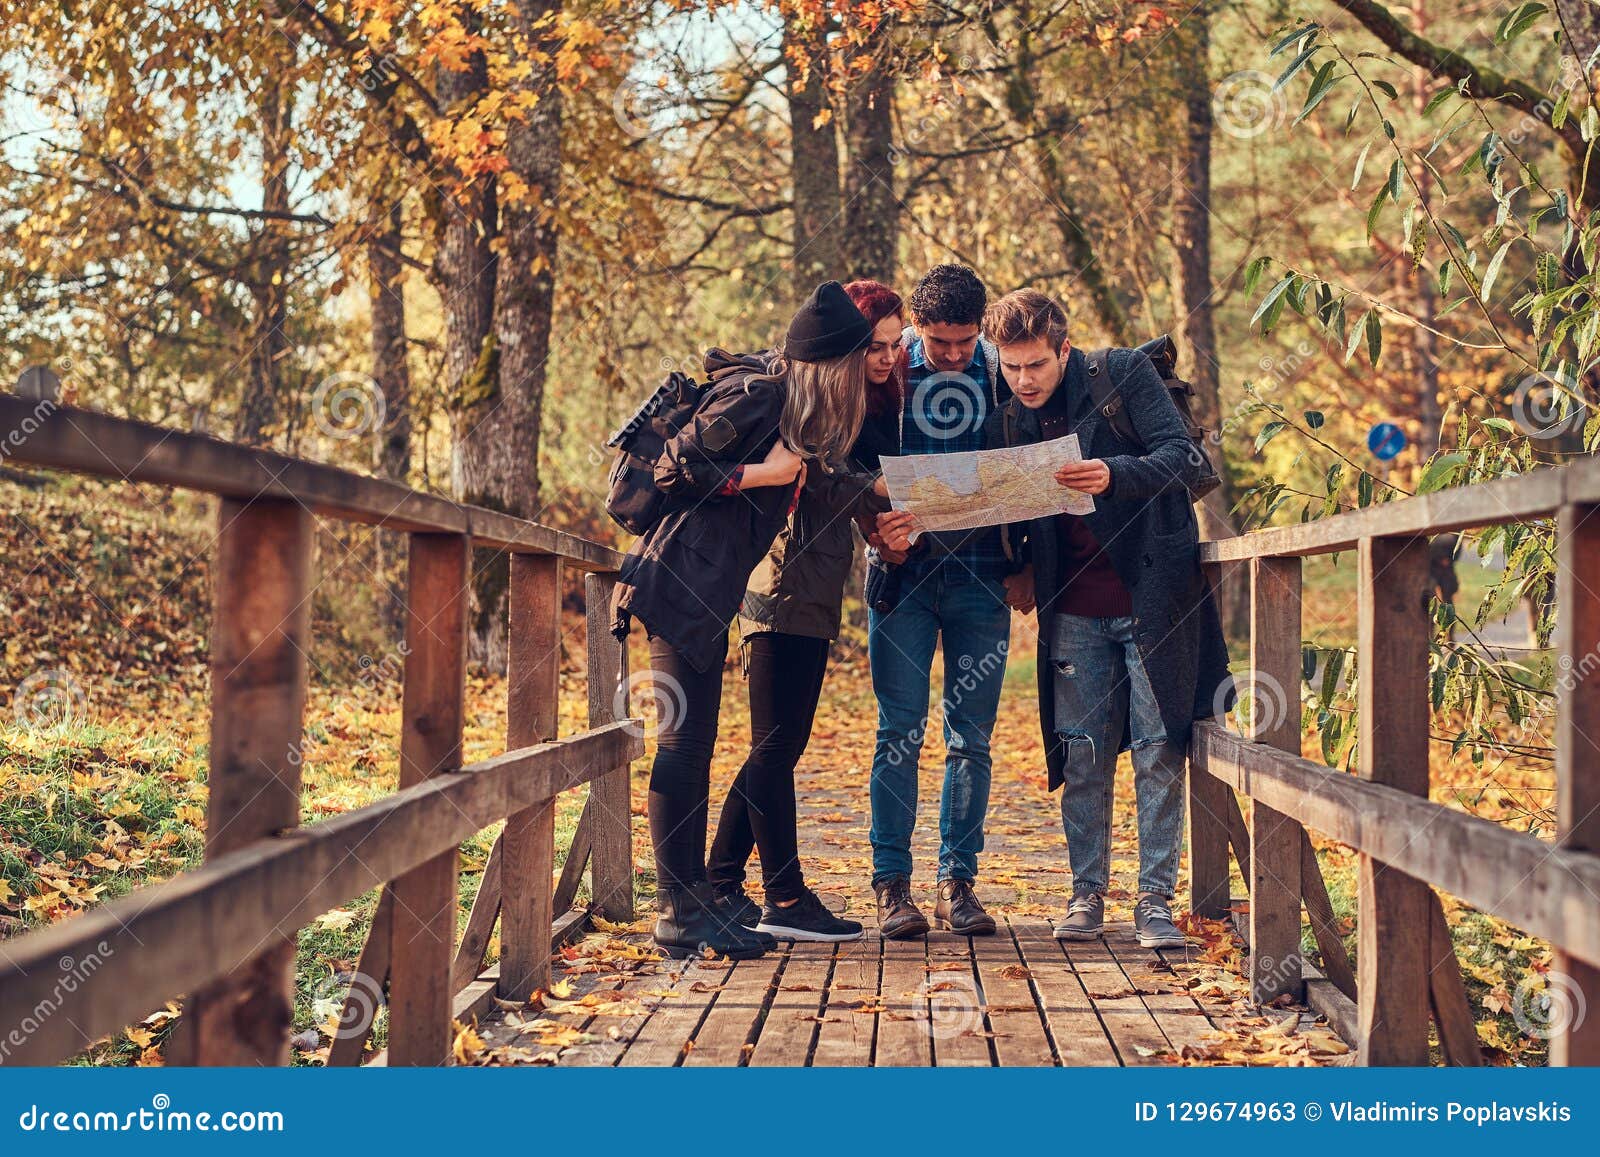 group of young friends hiking in autumn colorful forest, looking at map and planning hike.